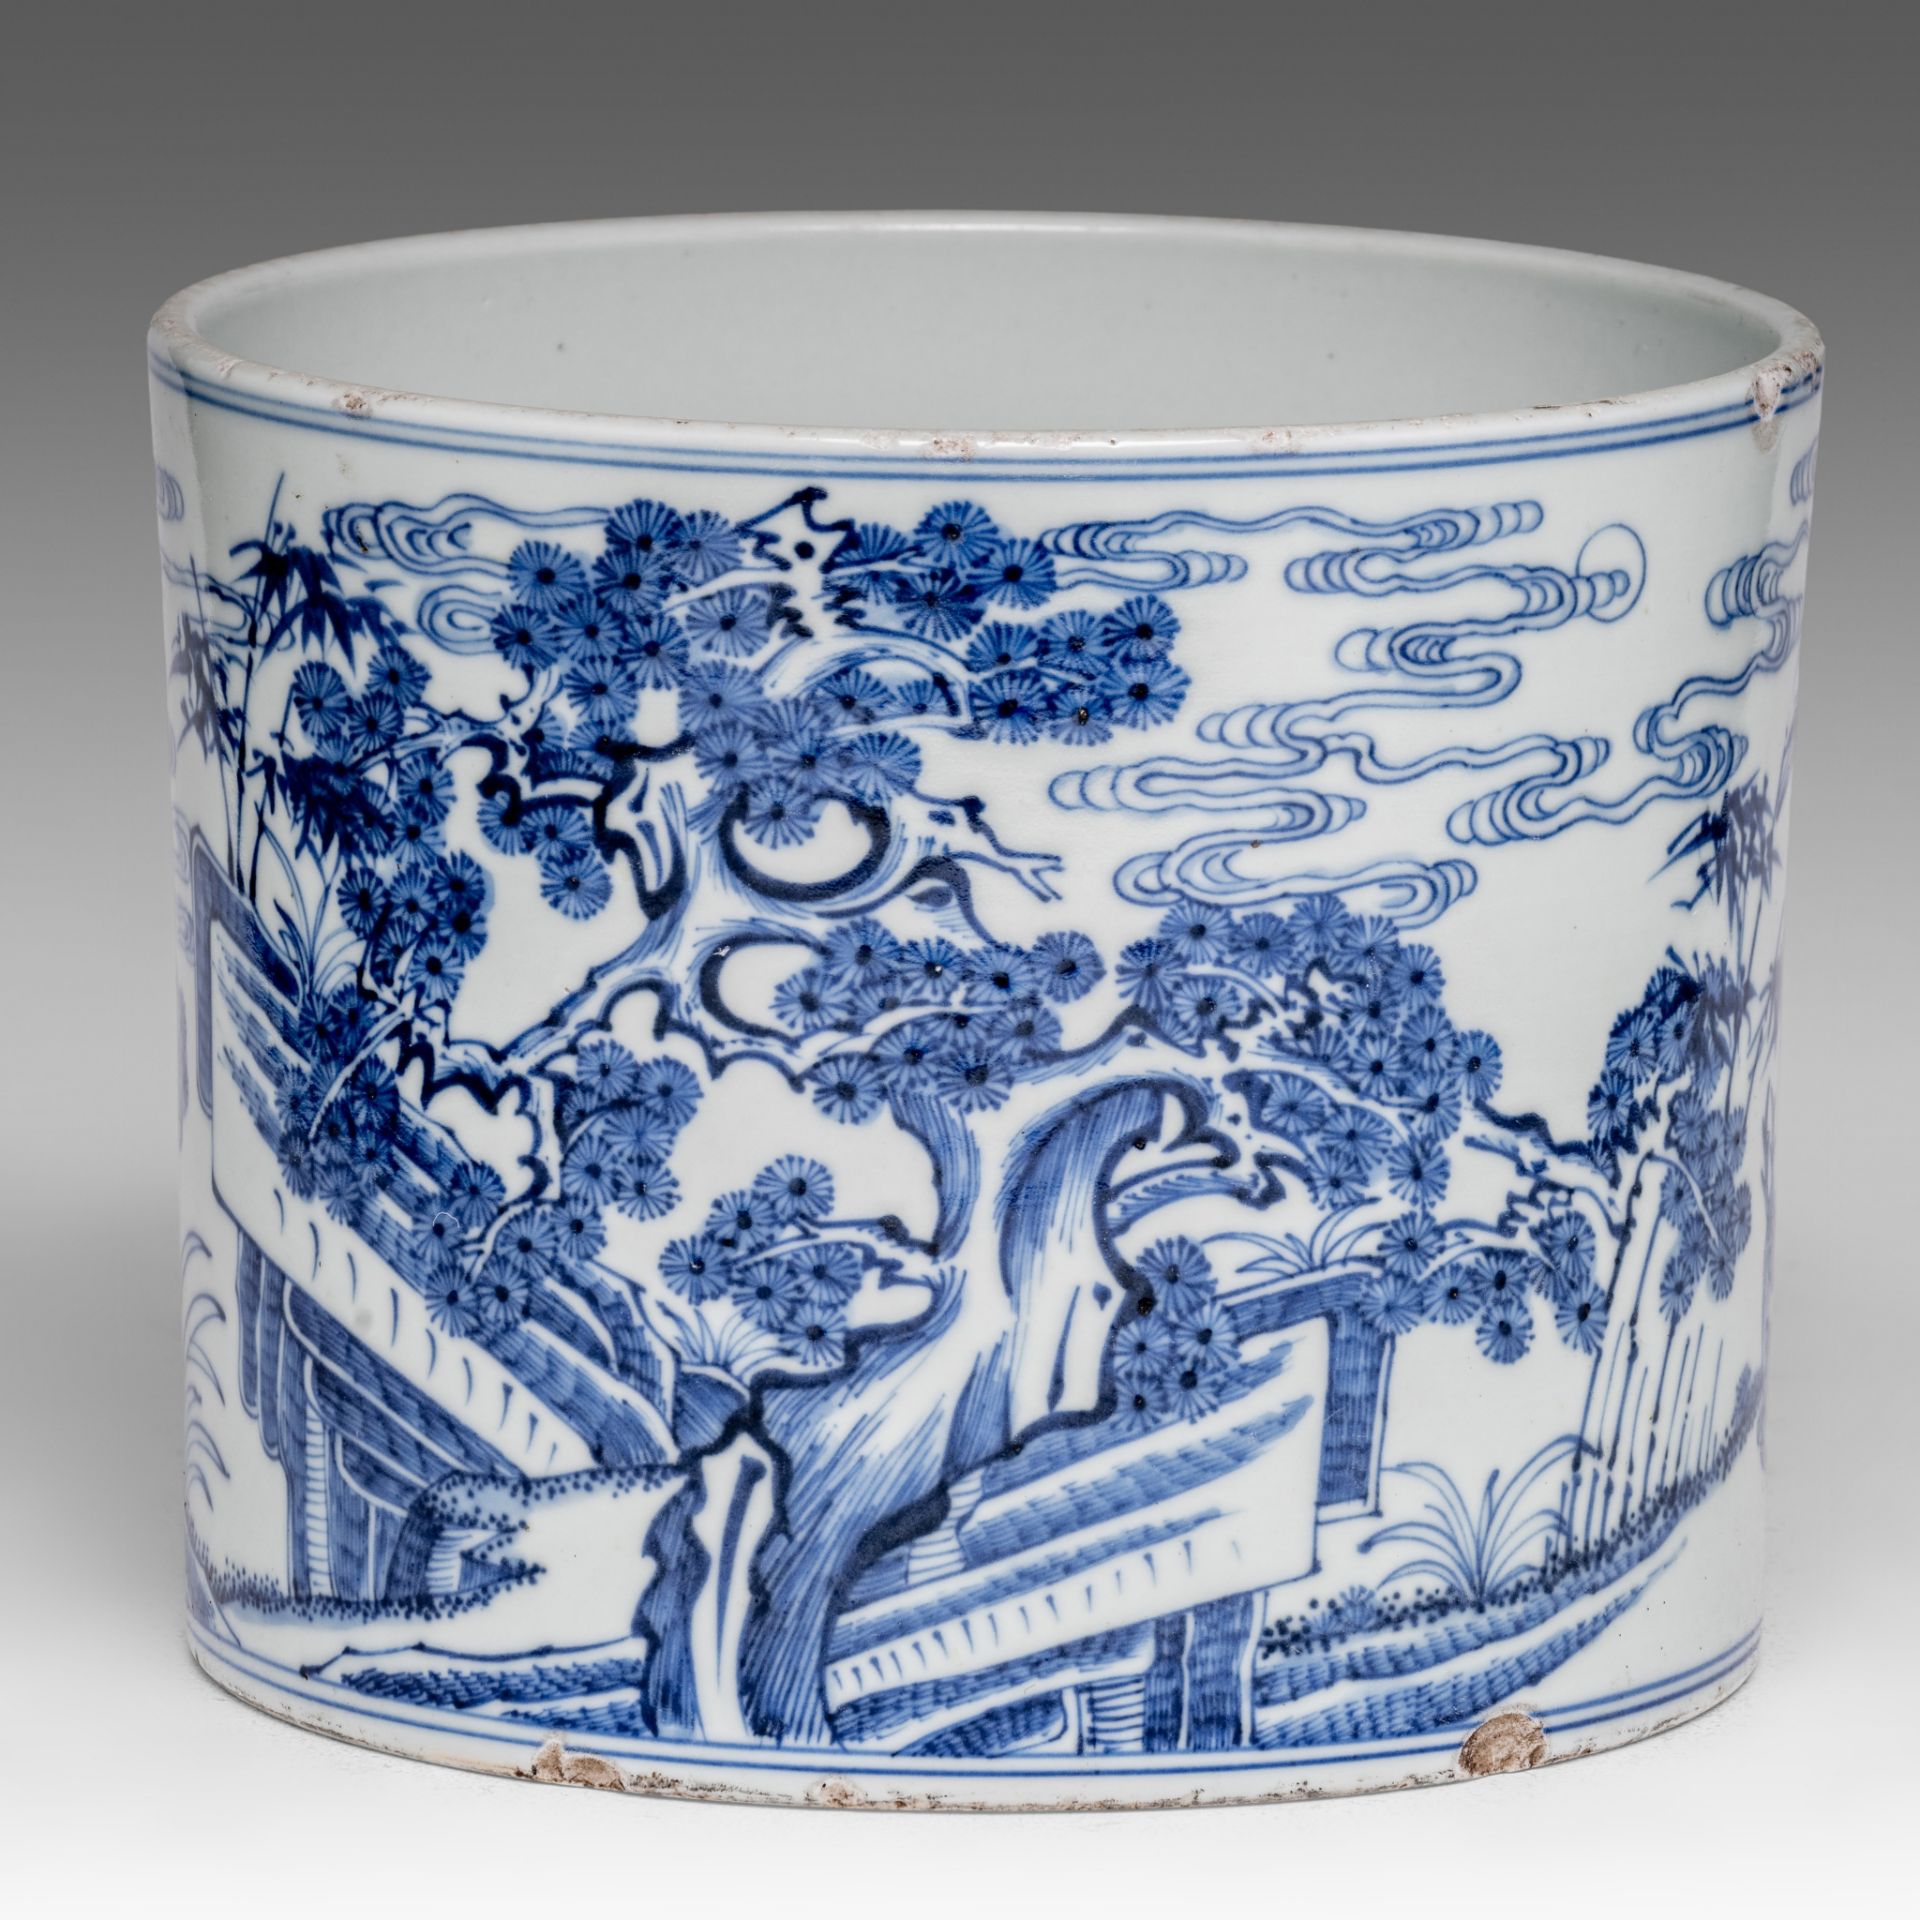 A Chinese blue and white 'Deer' brush pot, late 19thC, H 16 - dia 19,5 cm - Image 3 of 8